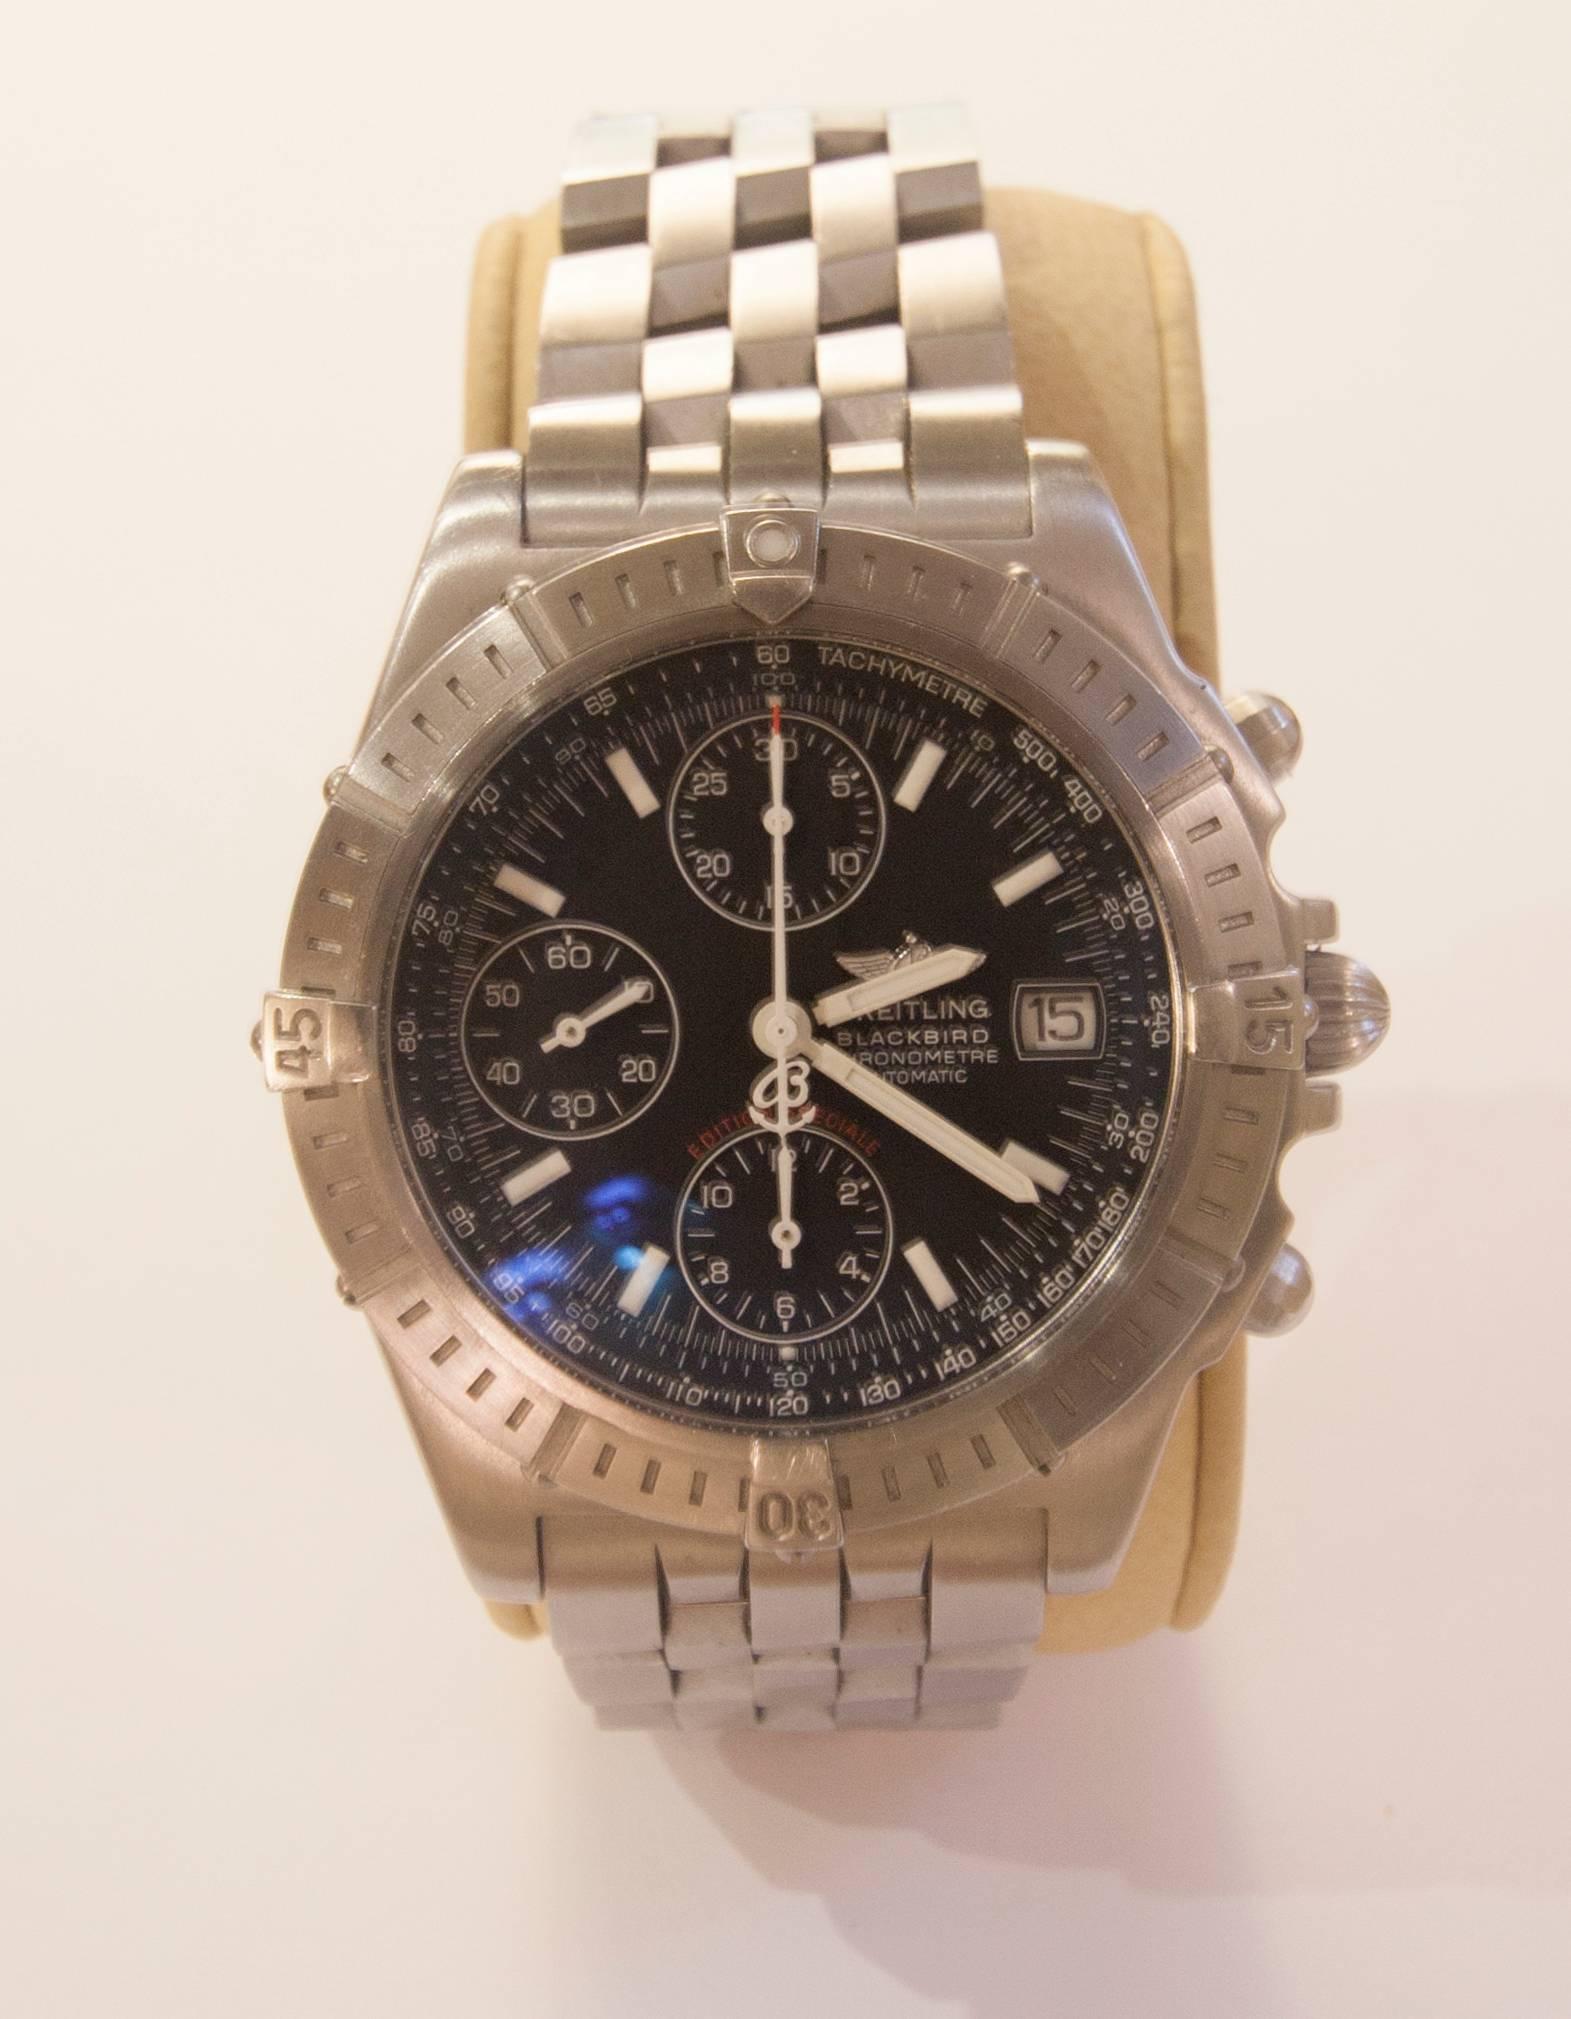 Breitling A13353 Blackbird Stainless Steel Chronograph Special Edition Watch For Sale 3